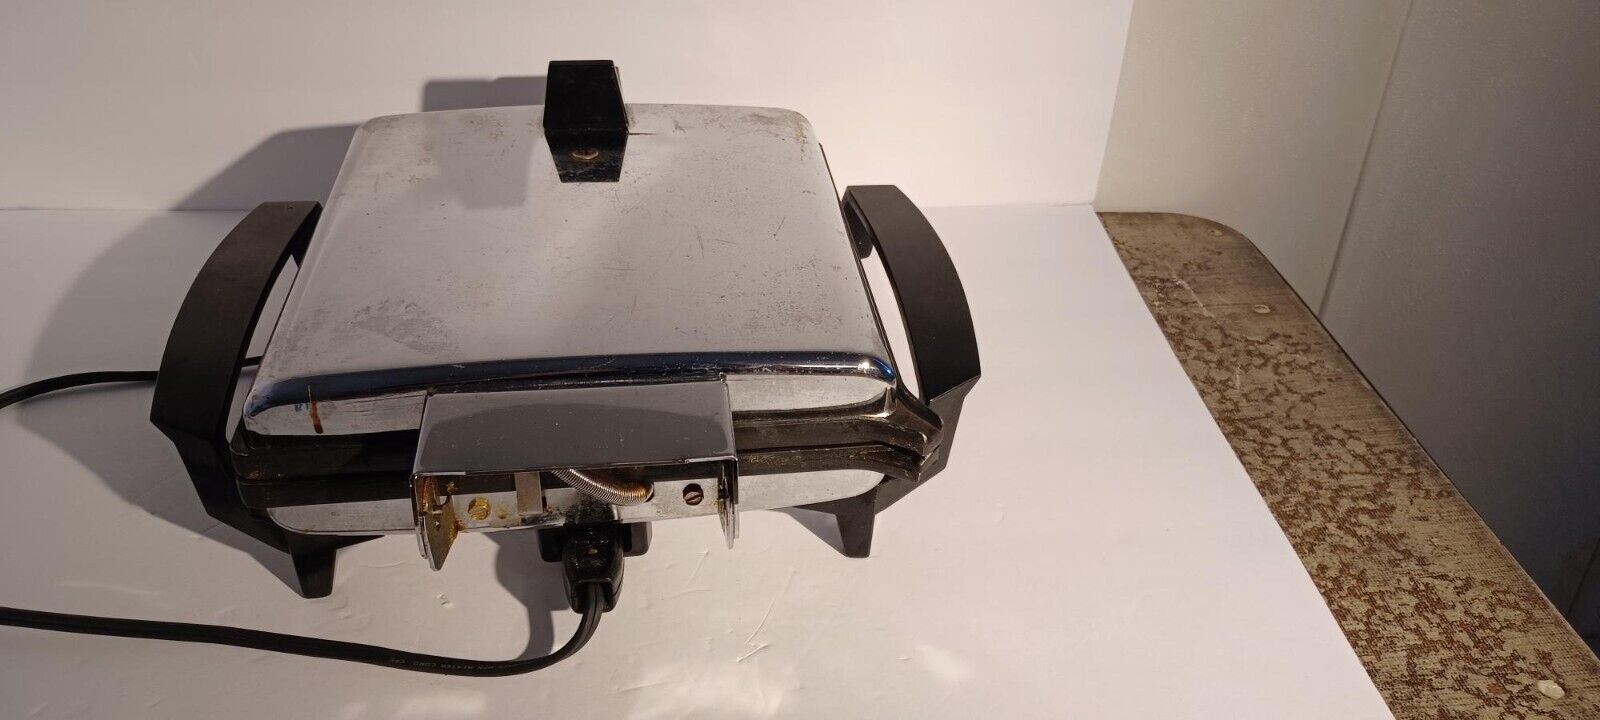 Mirro-Matic Waffle Iron M-034-37 Tested and Working MCM Chrome With Cord